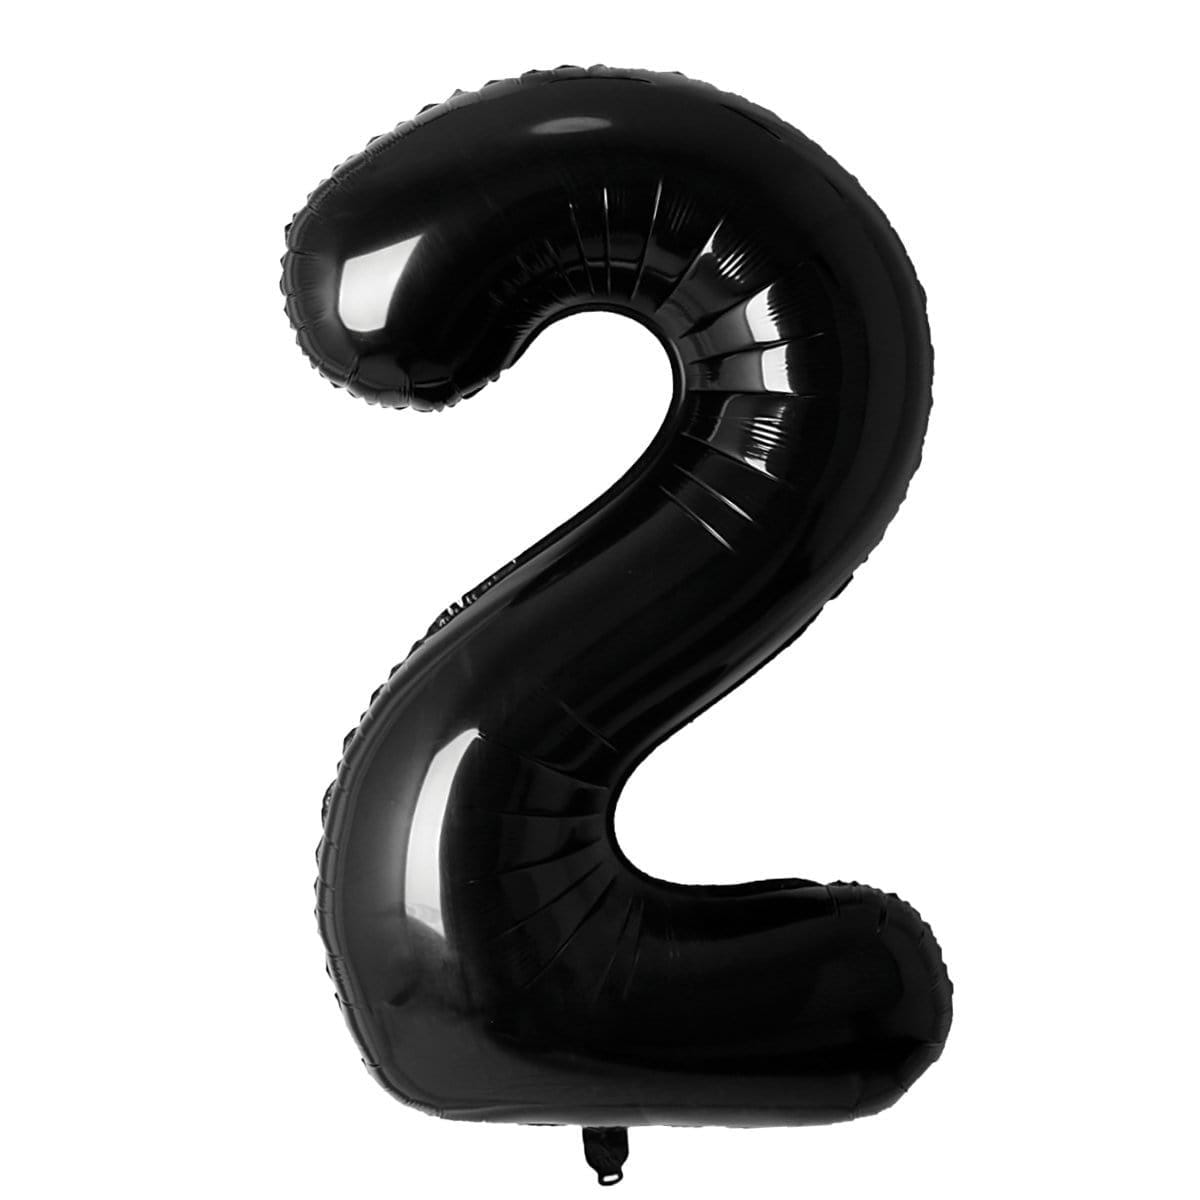 Buy Balloons Black Number 2 Foil Balloon, 34 Inches sold at Party Expert